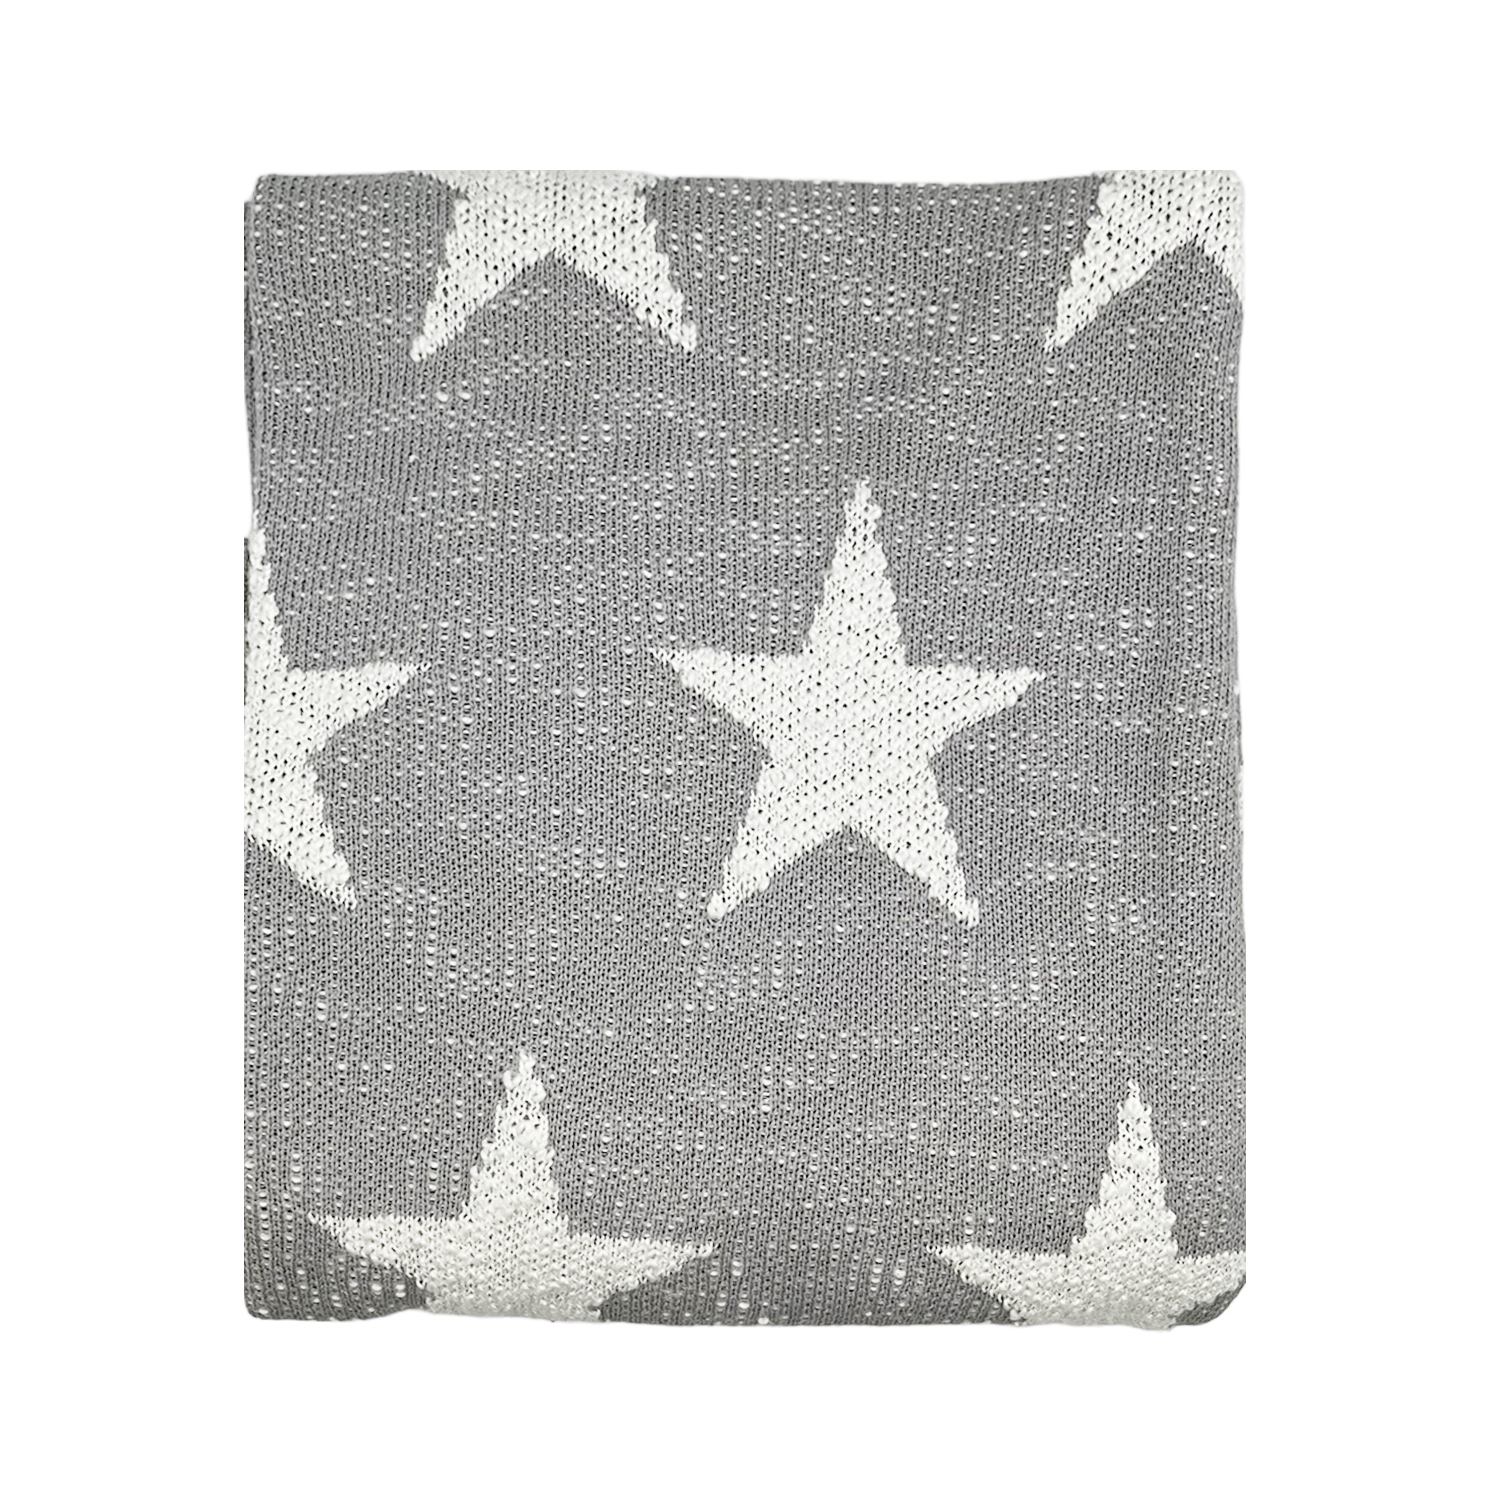 Textured Knitted Star Throw Light Grey 125x150cm Gift